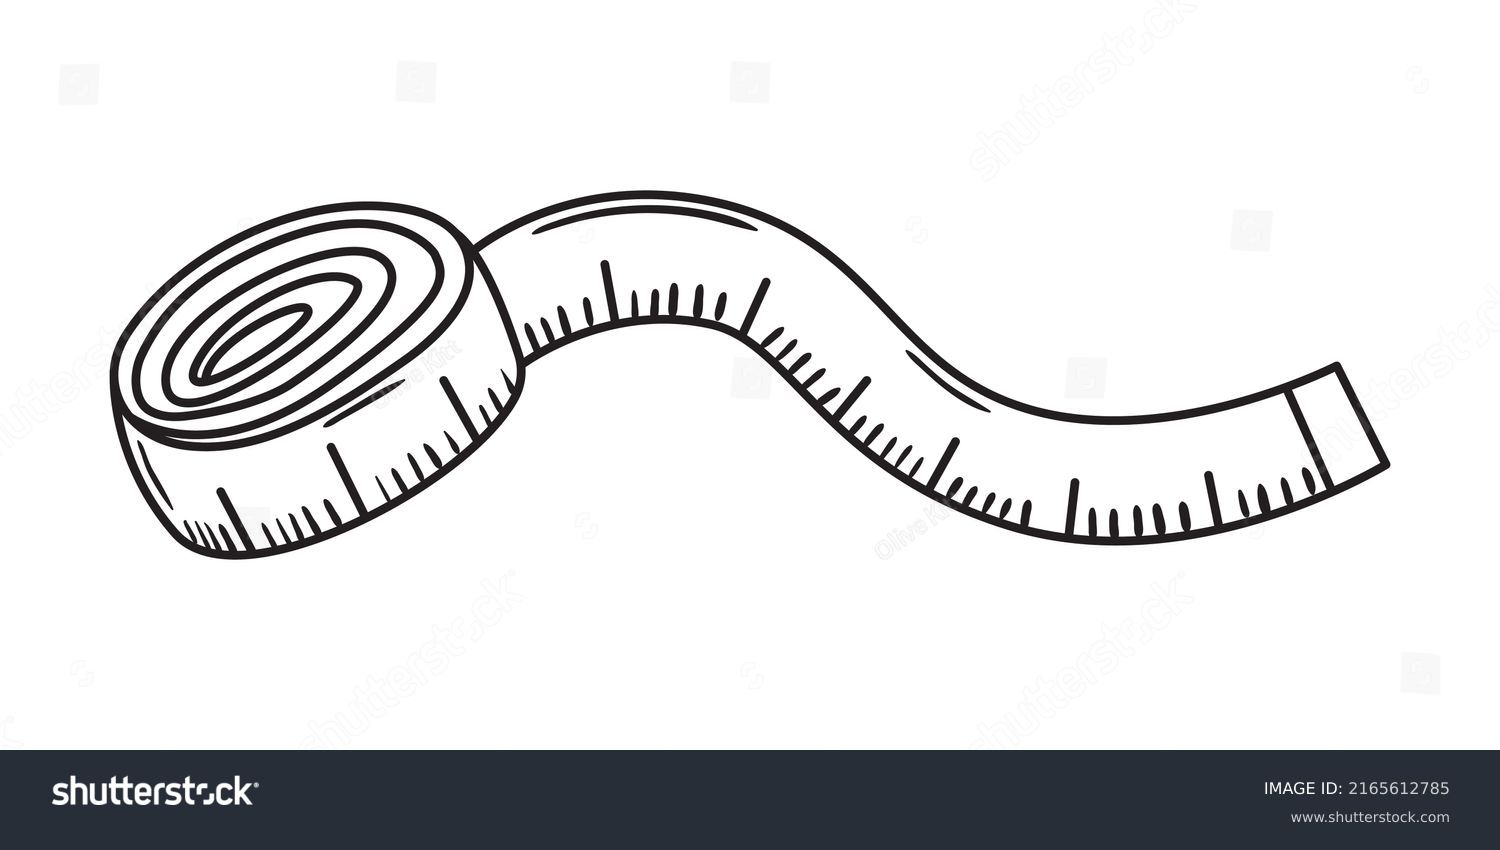 SVG of Outline doodle illustration of tape measure. Hand drawn sketch of rolled metric ribbon. Studio, atelier, fitness vector icon isolated on white background svg